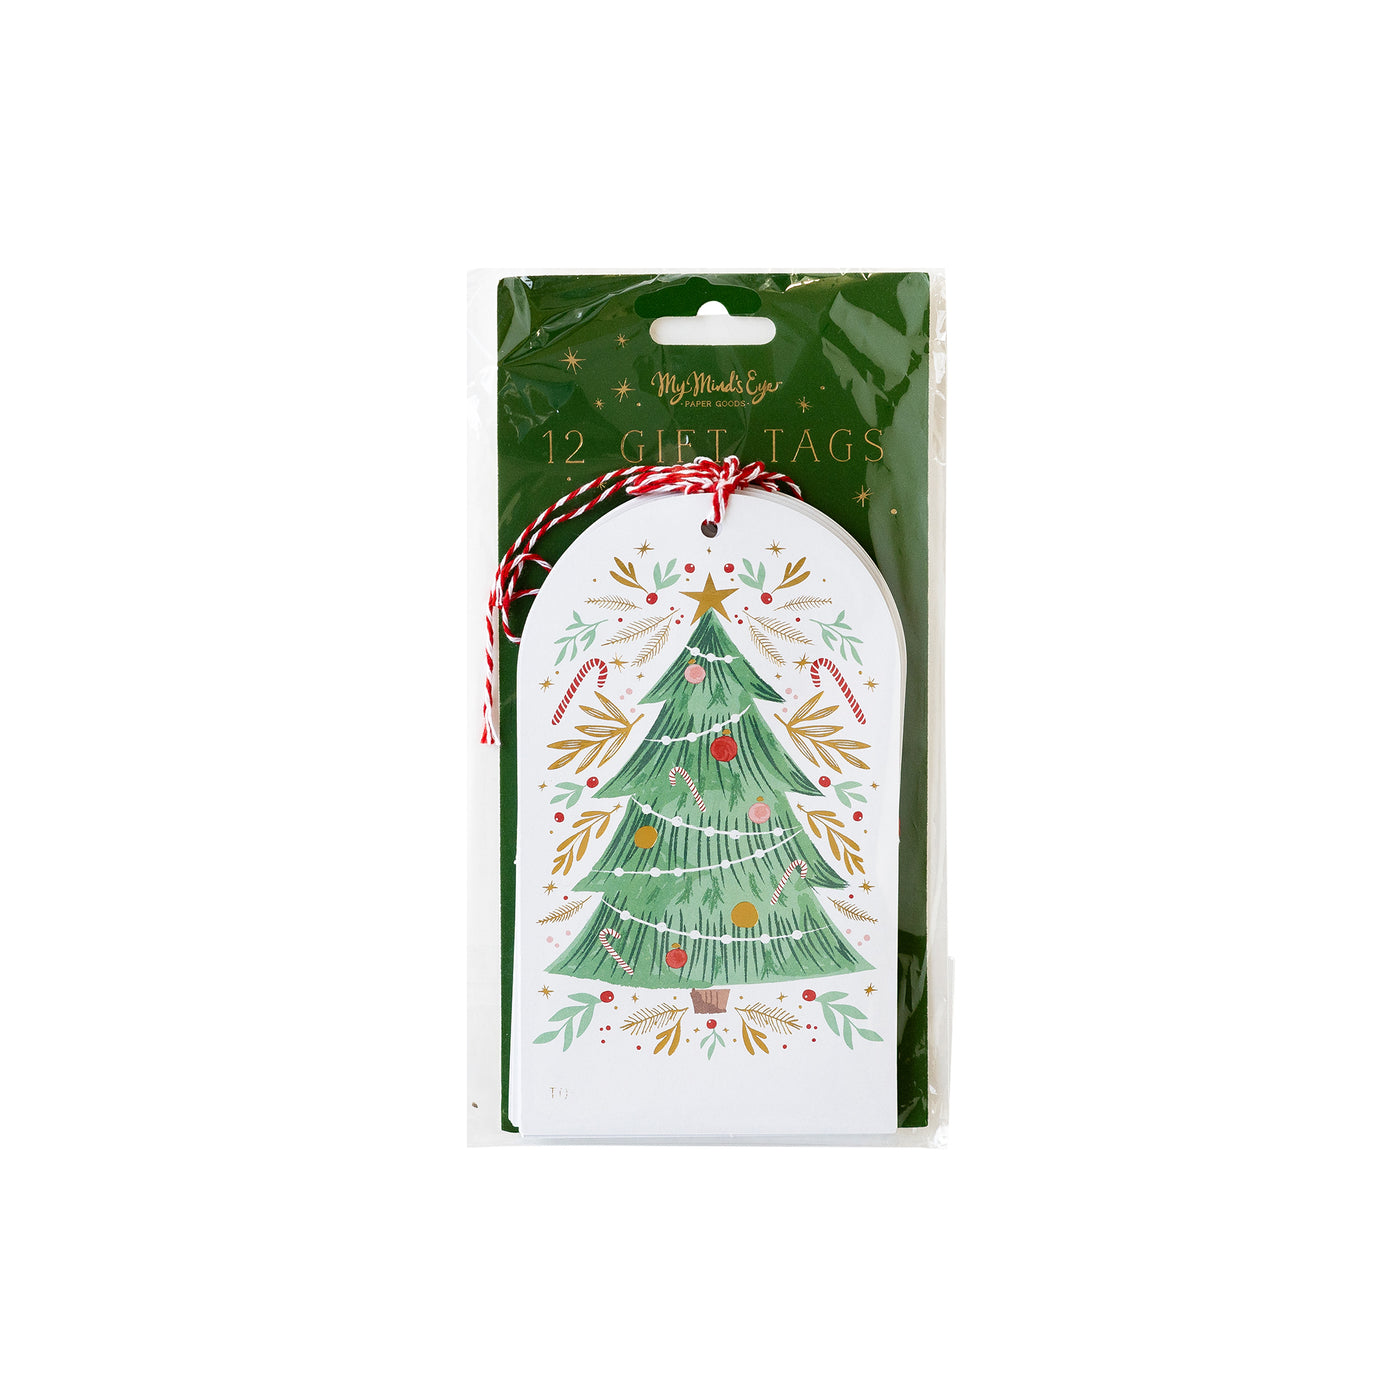 Golden Christmas Tree Over-sized Tags